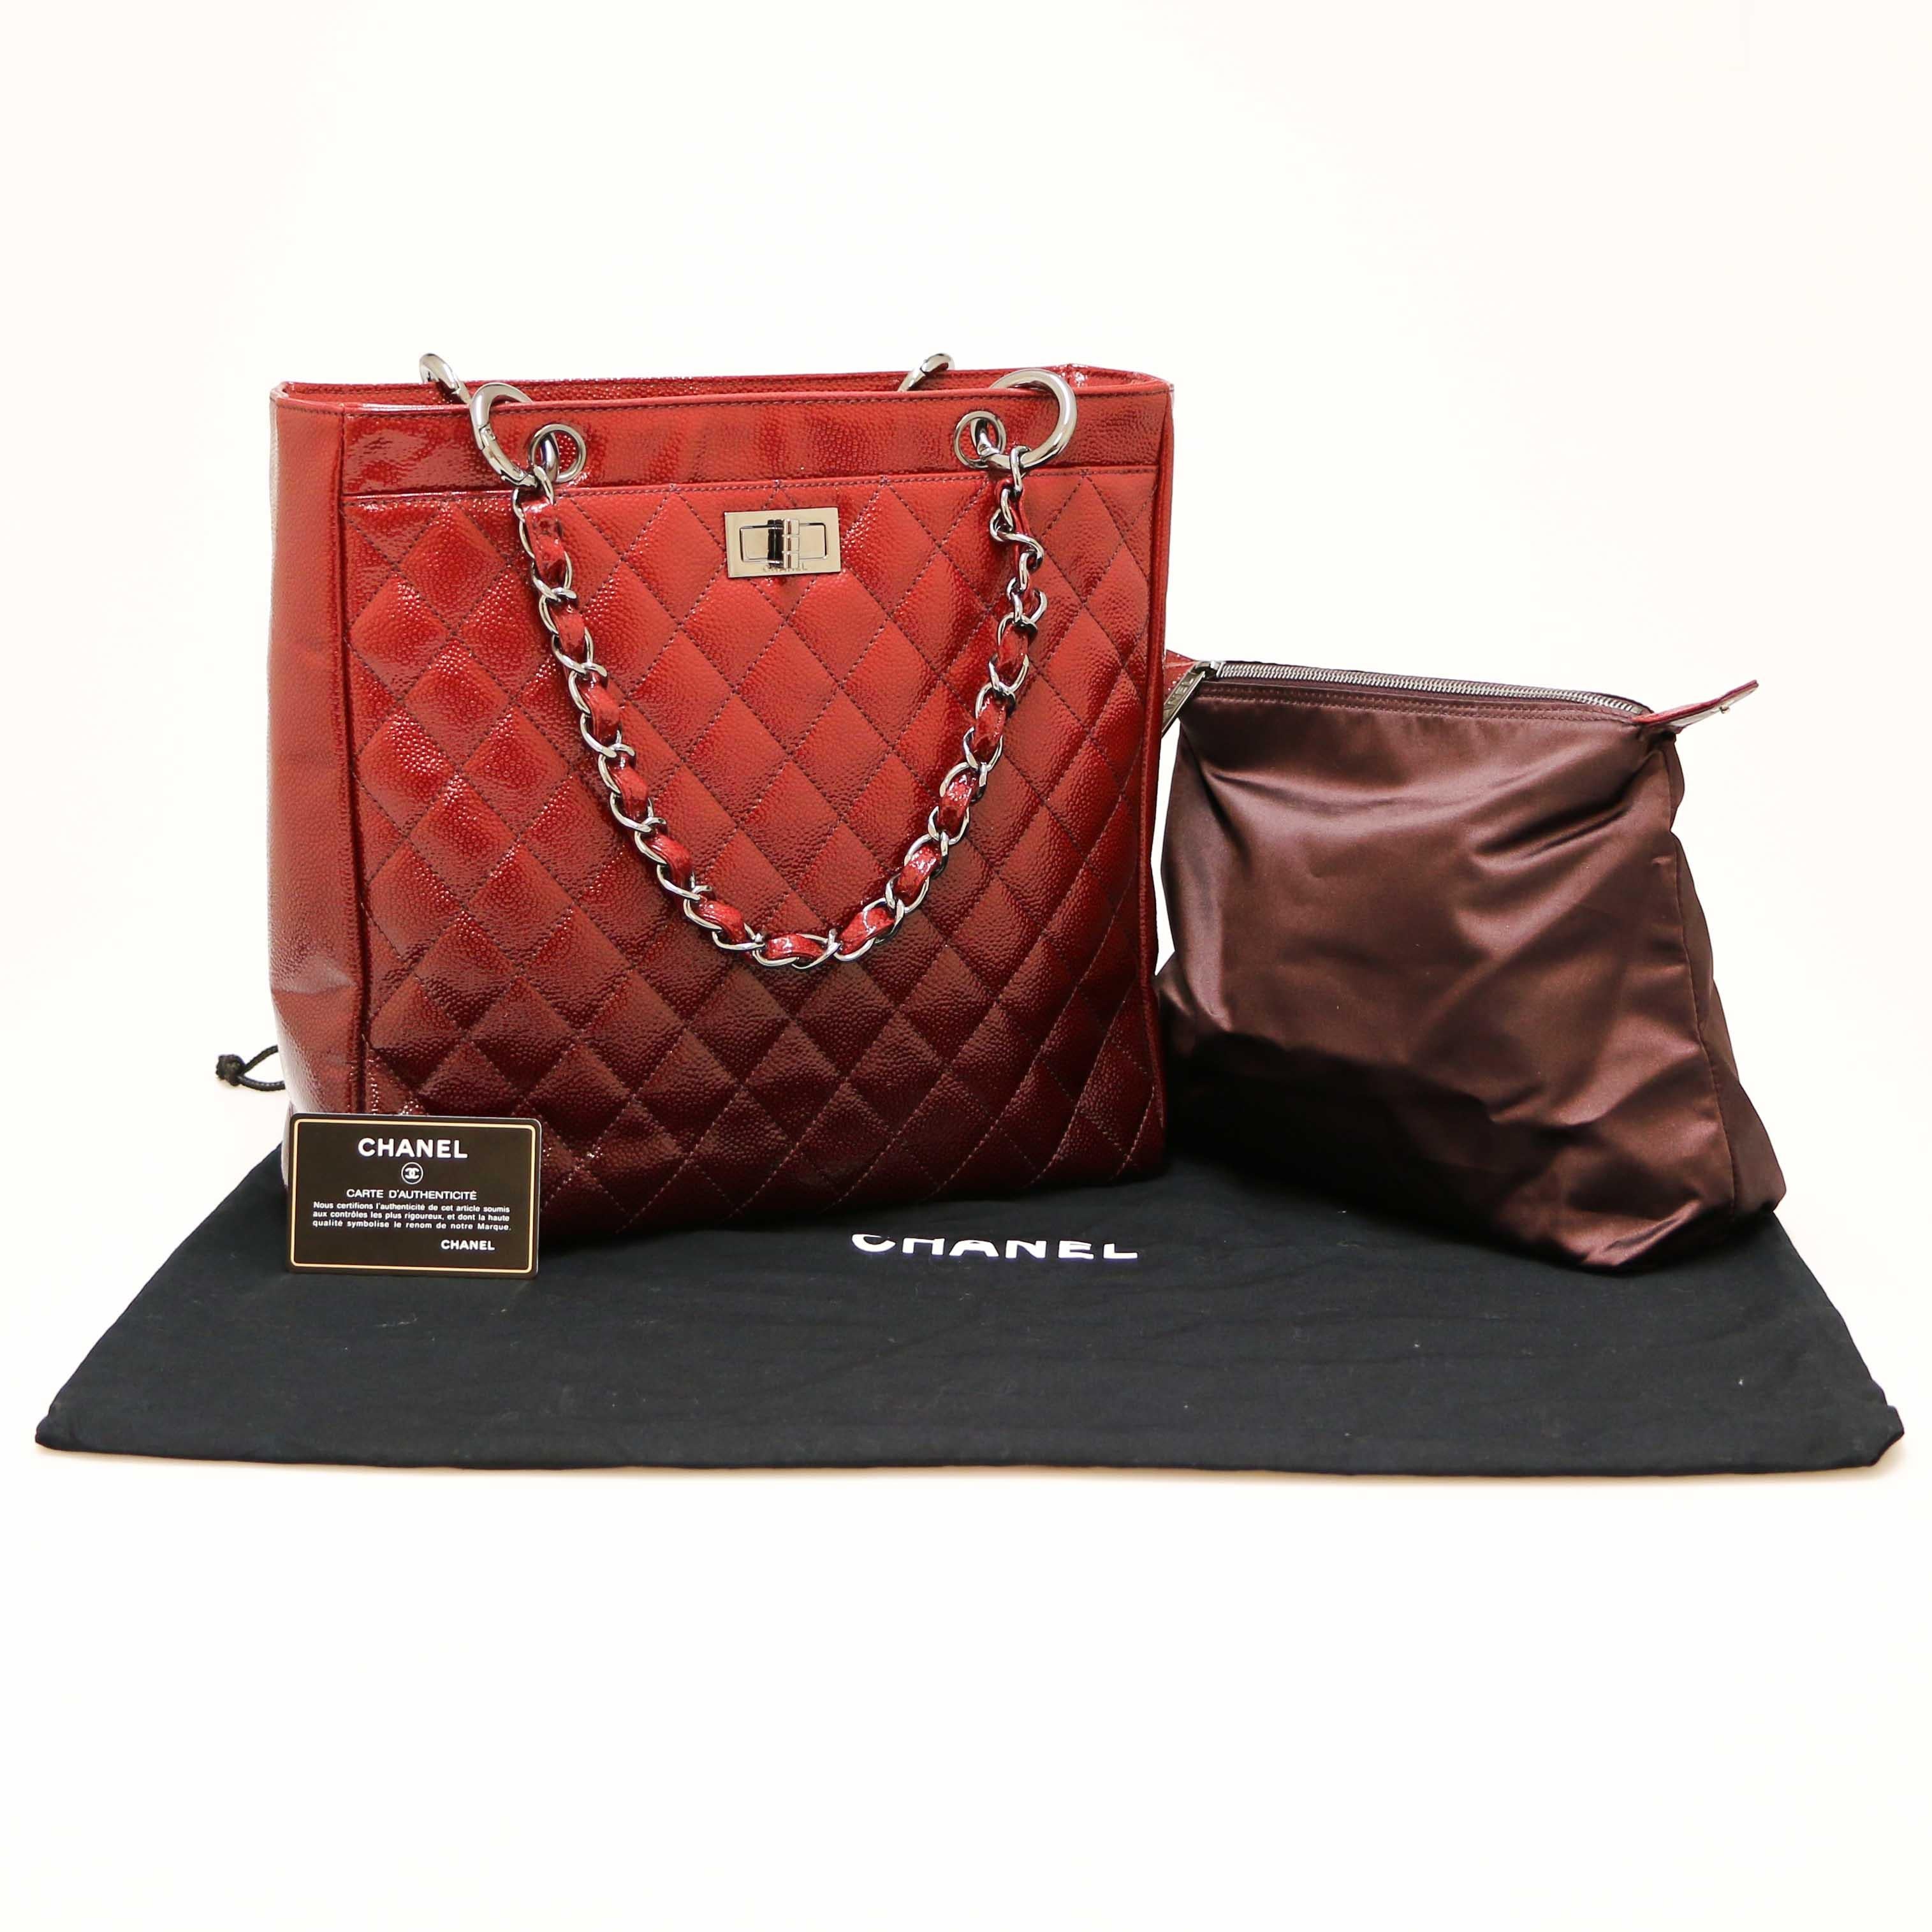 Chanel Burgundy Patent Leather Tote Bag In Excellent Condition For Sale In Paris, FR